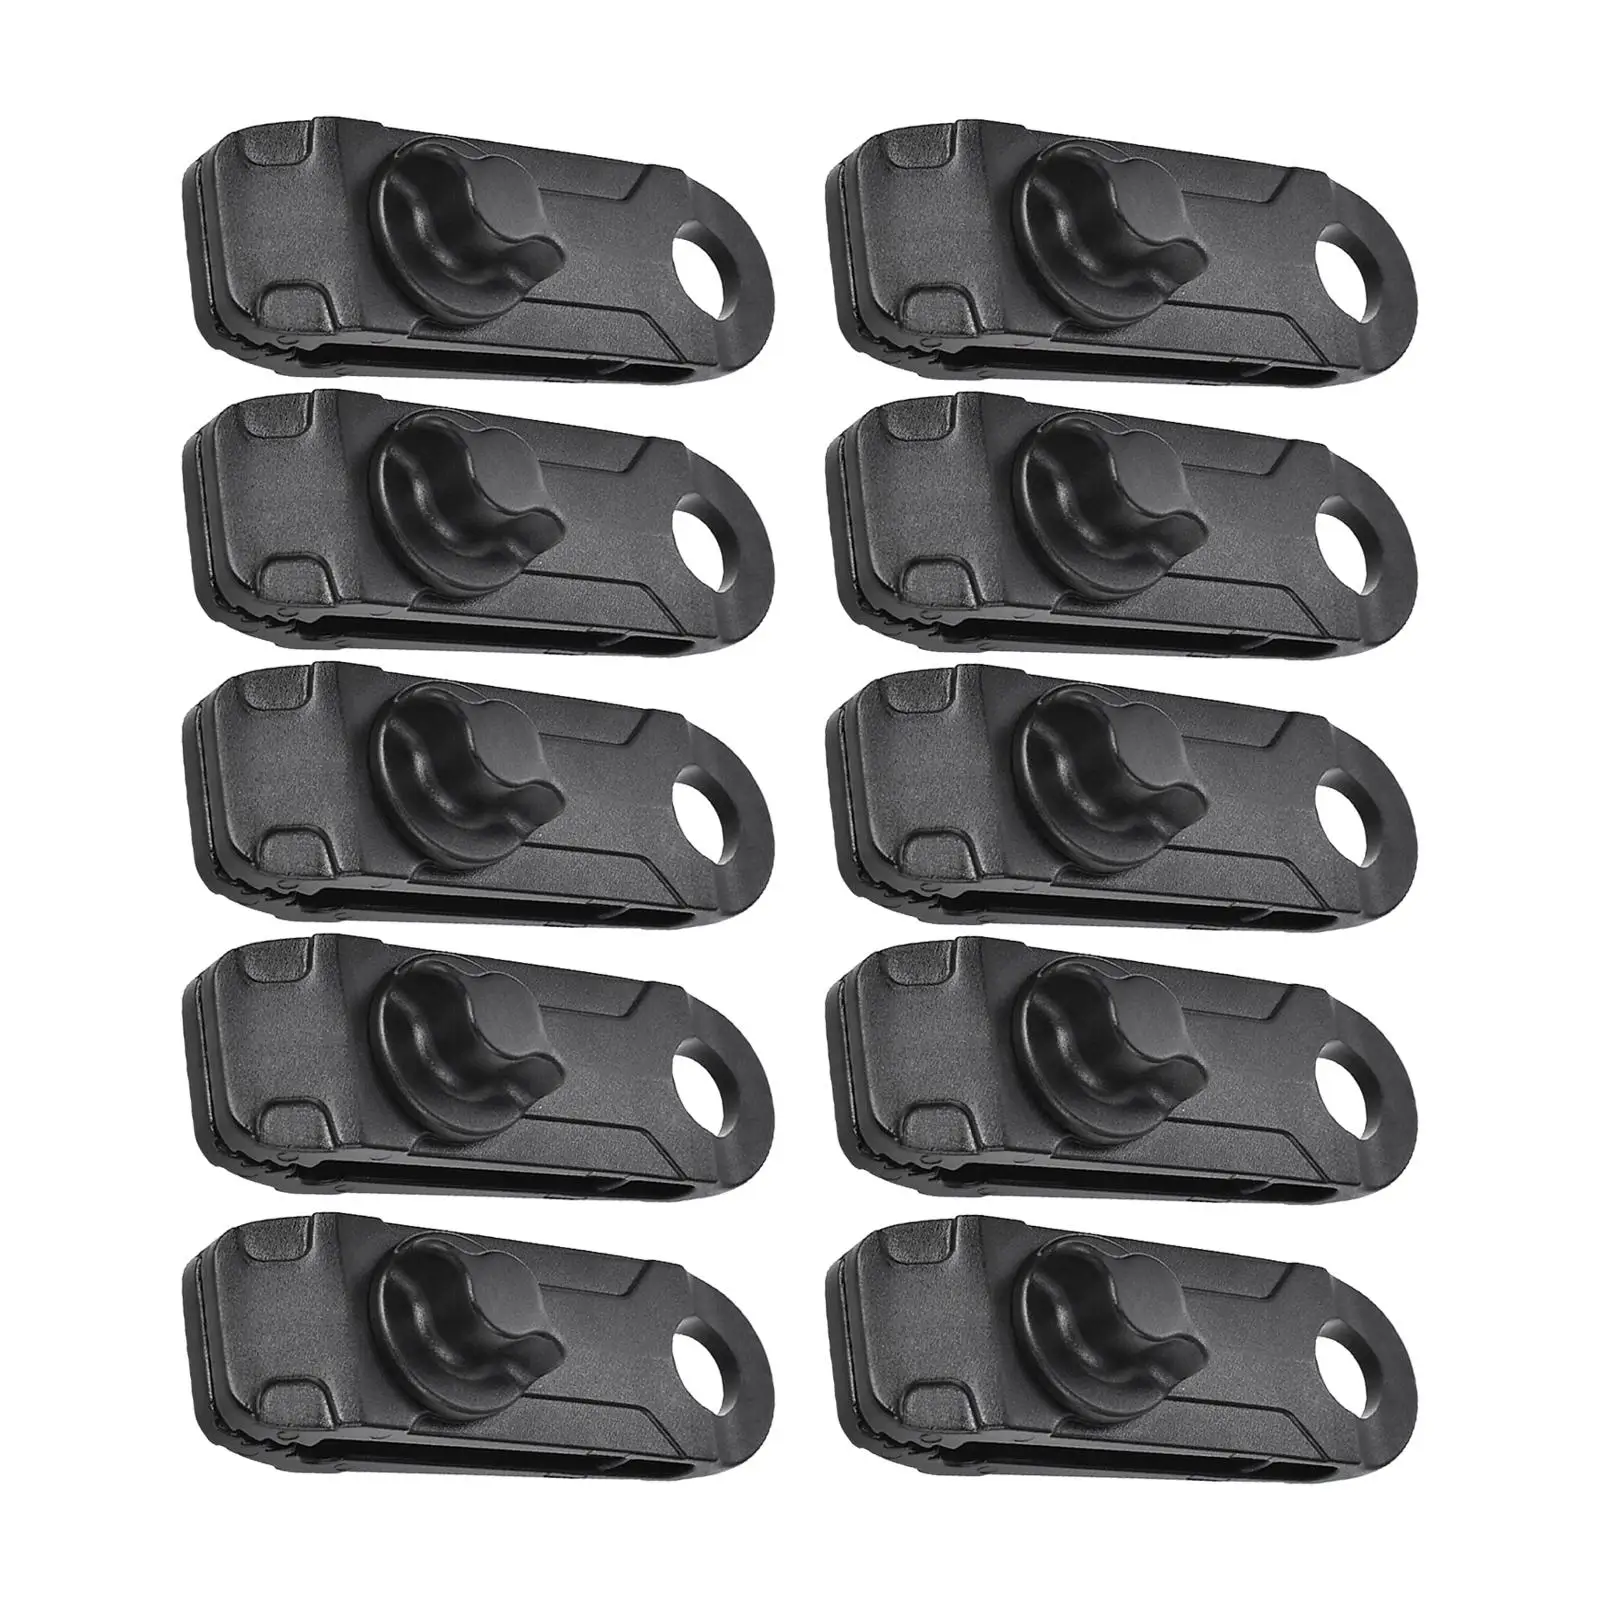 10 Pieces Reusable Tent Canopy Cloth Clips Adjustable Accessories Buckle Tool Black for Boat Cover Car Covers Projector Screen